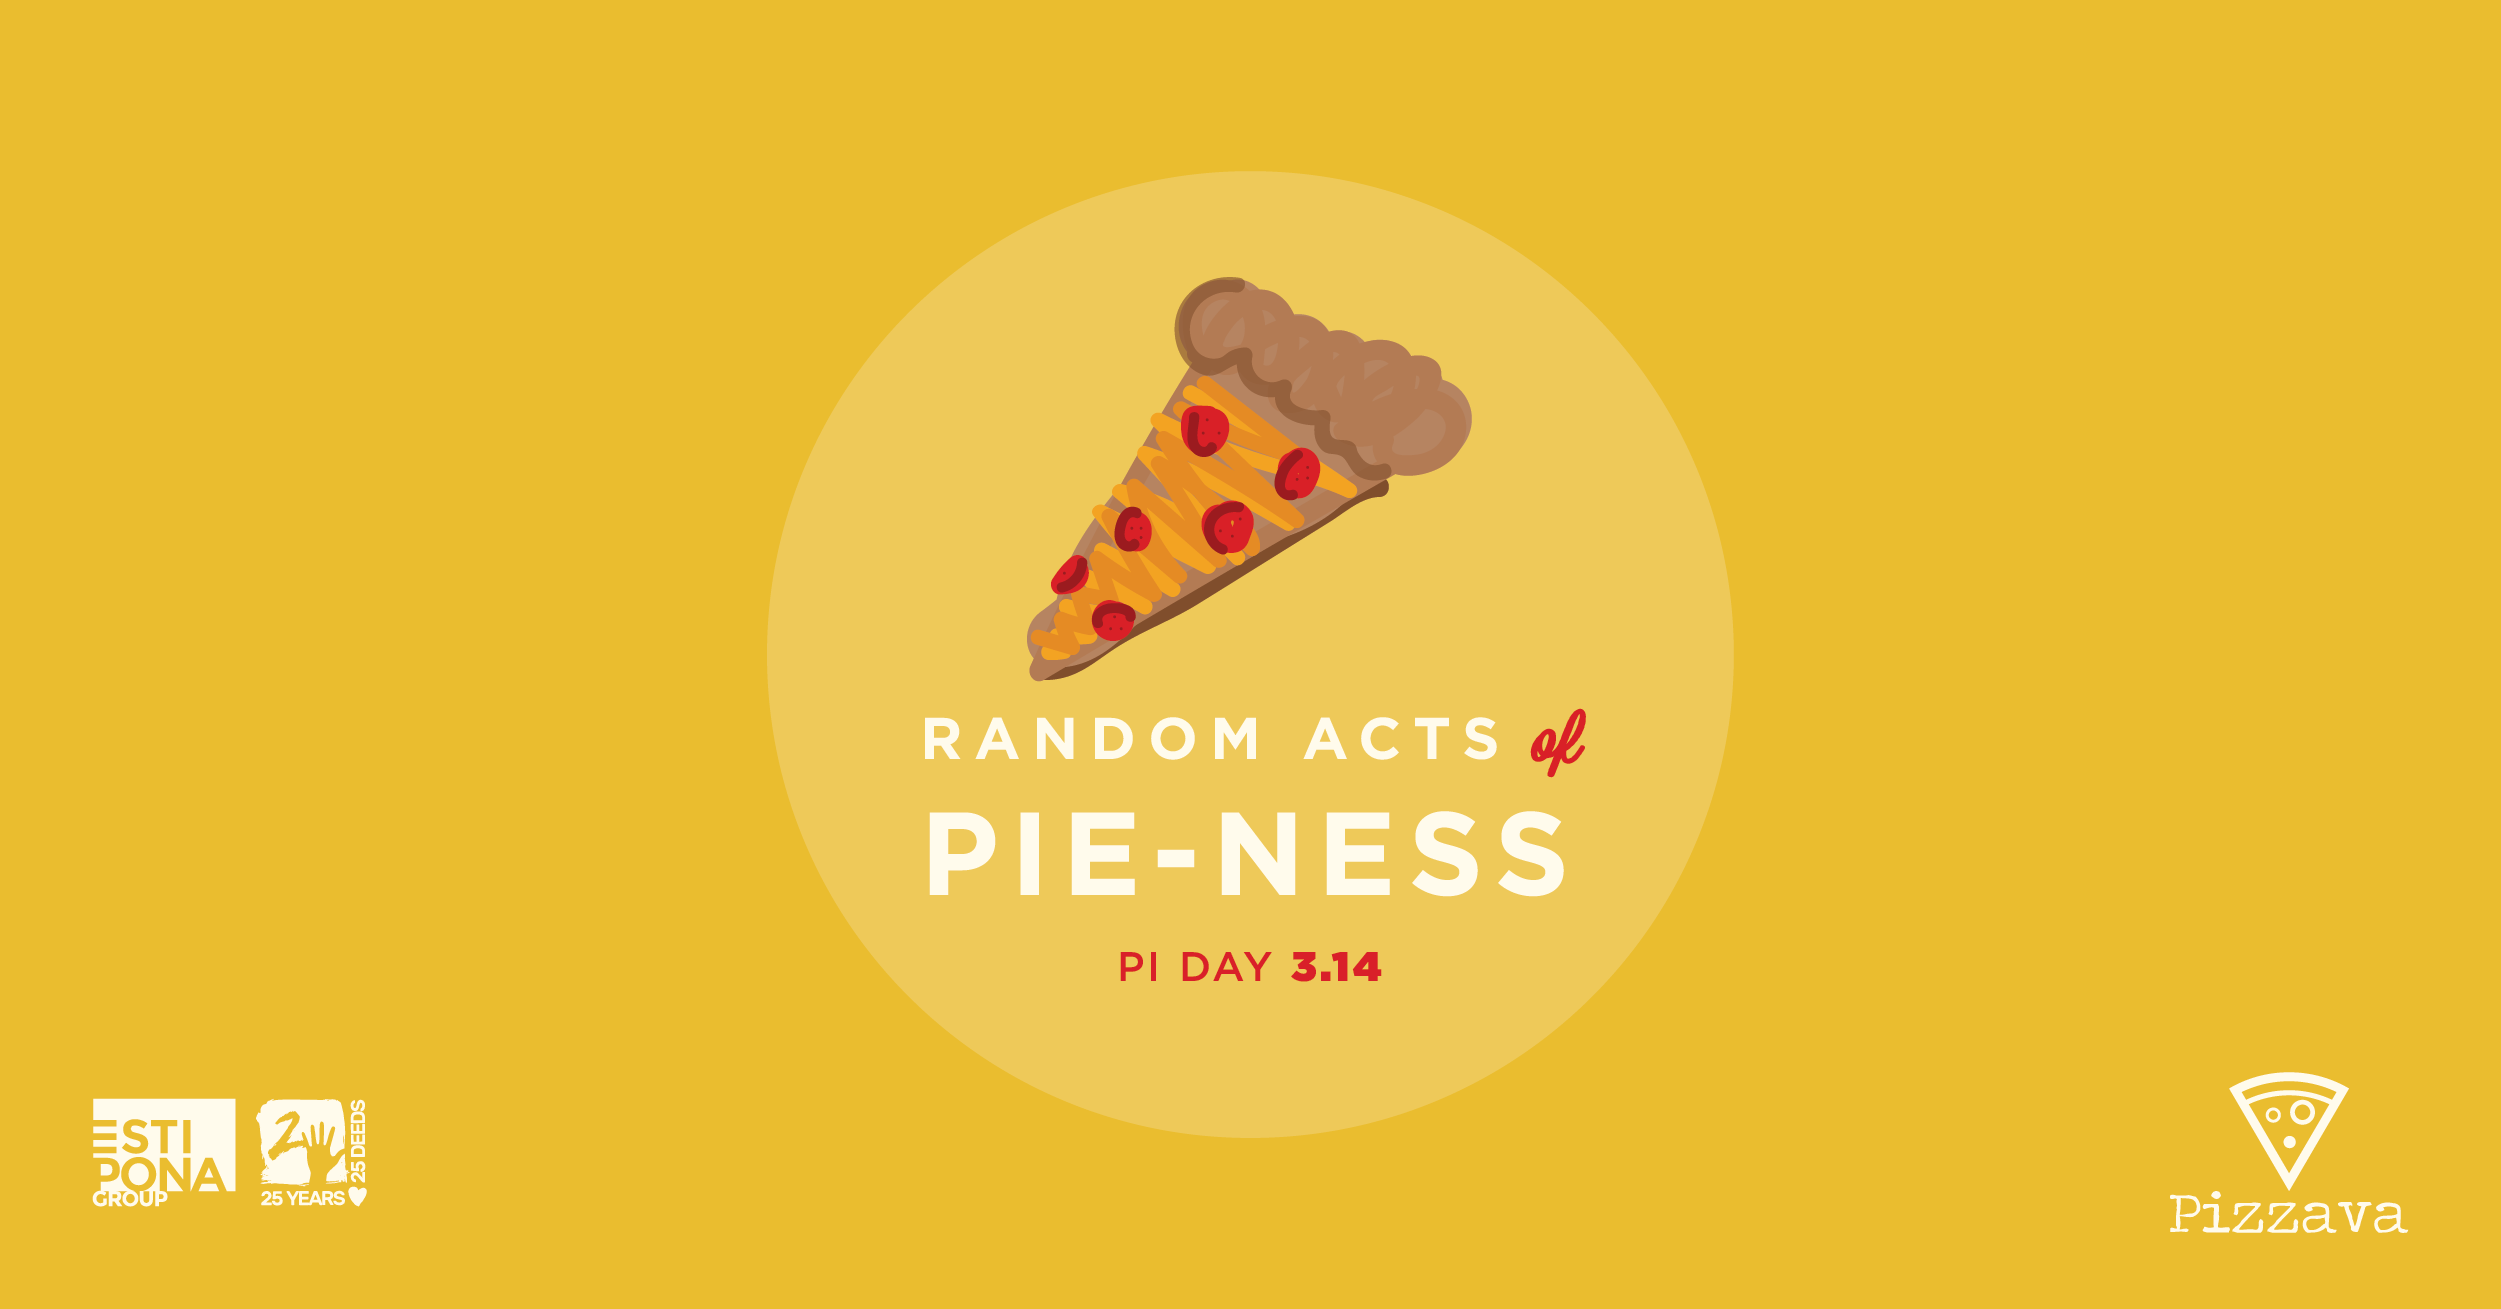 Ready to Commit a Random Act of Pie-ness?